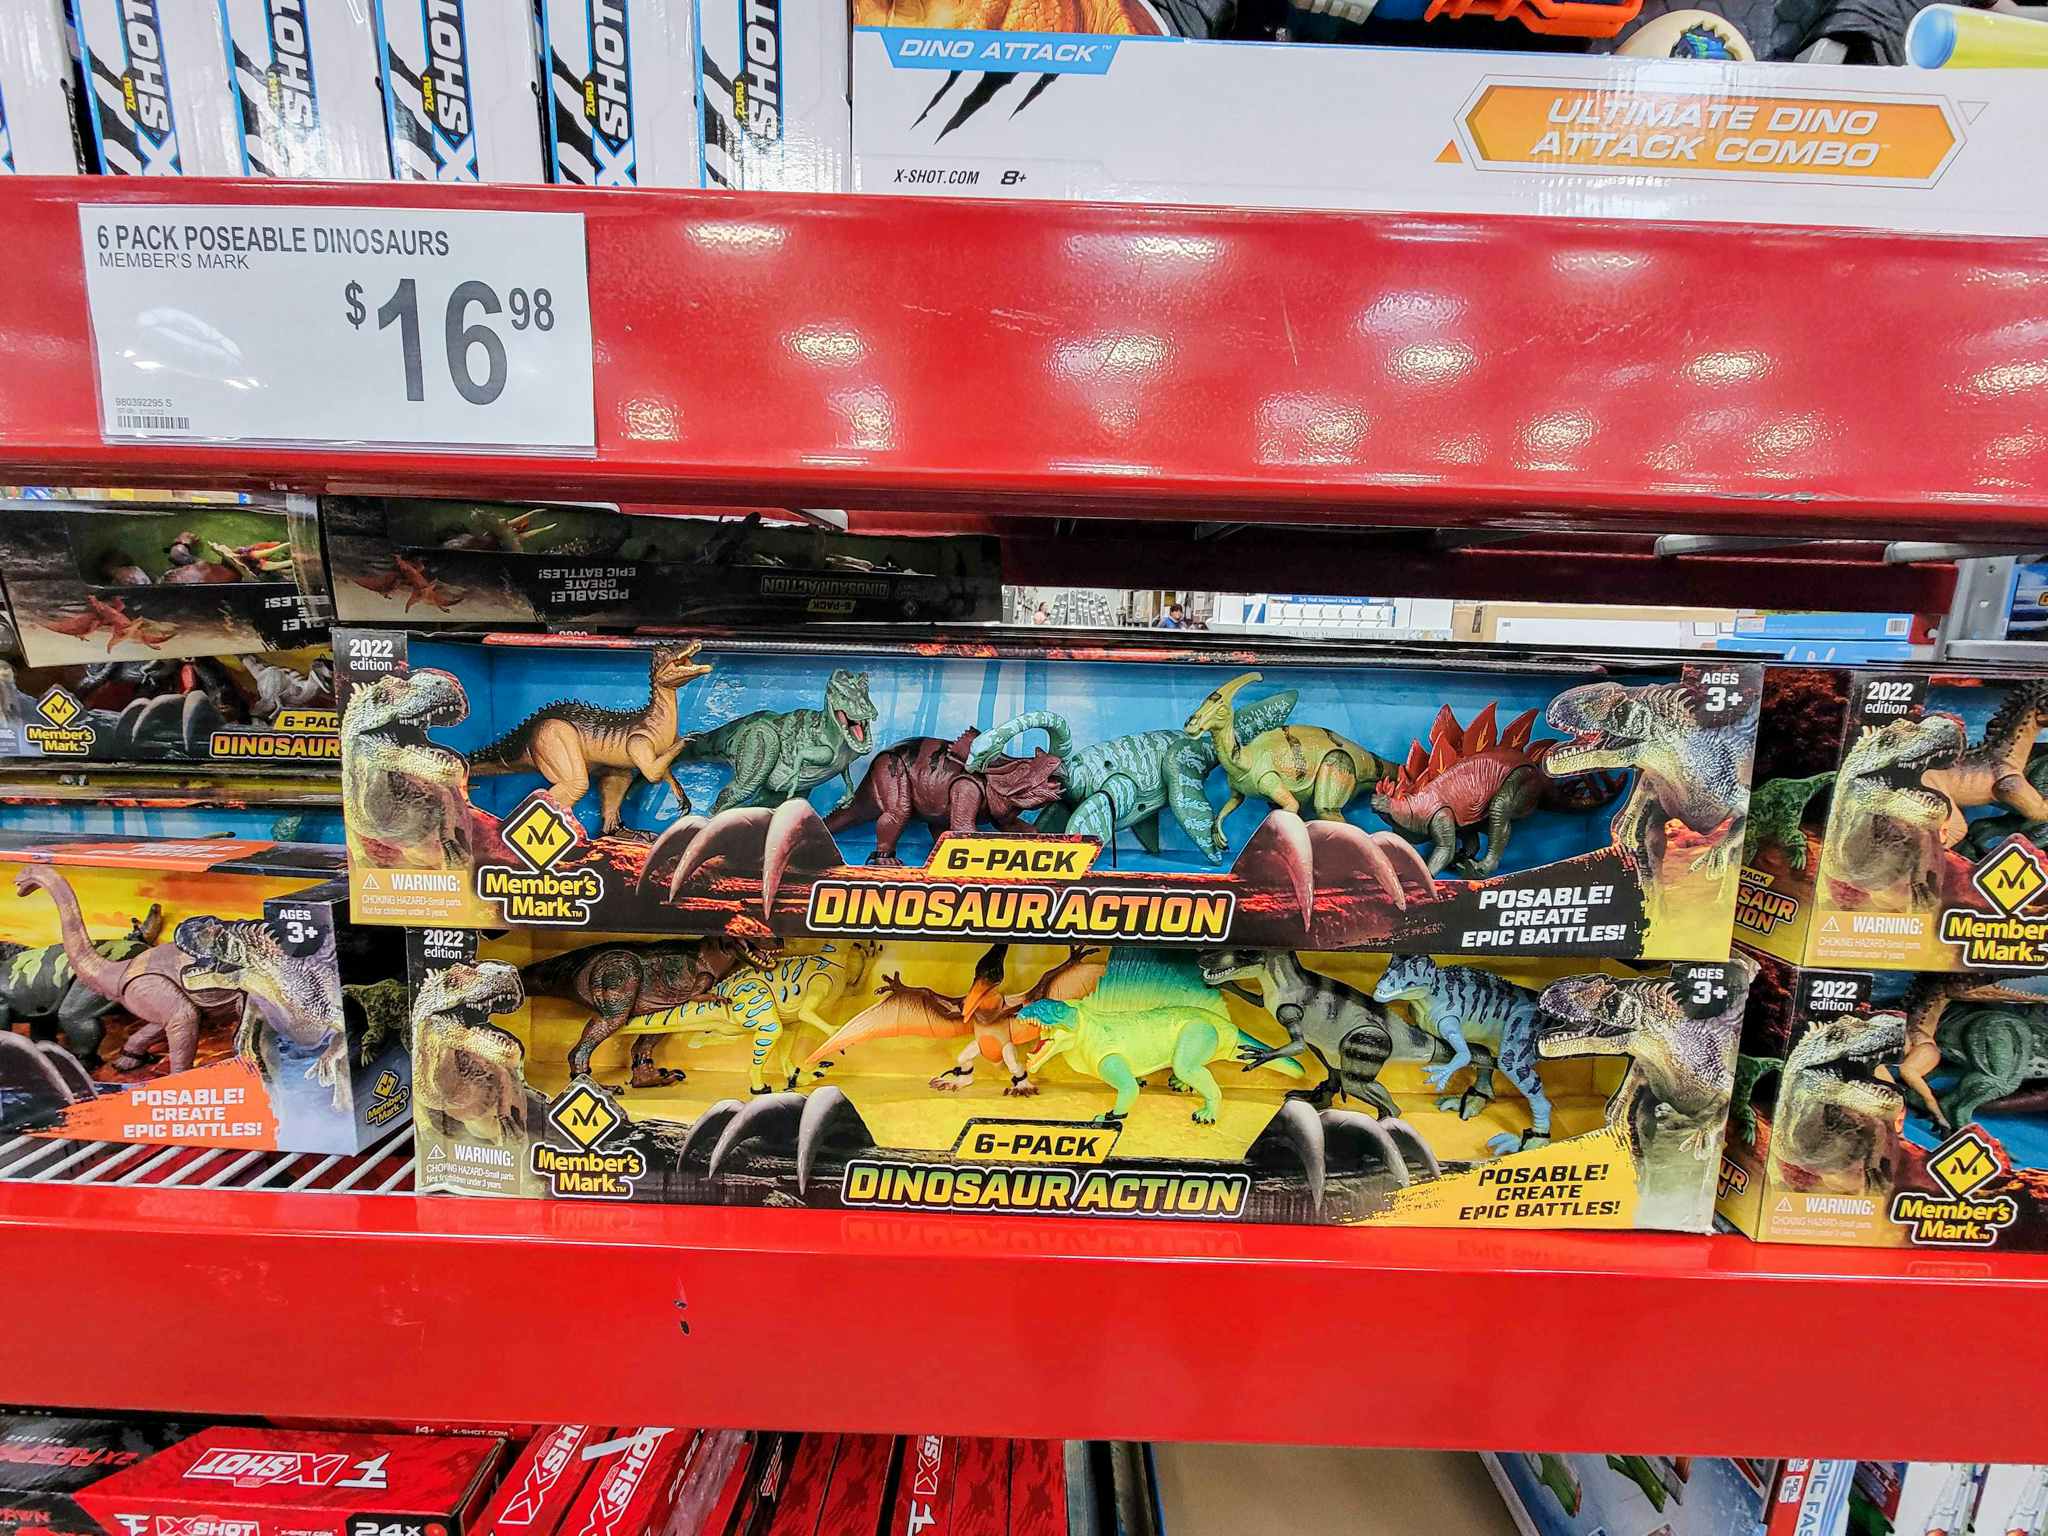 a set of 6 posable dinosaurs